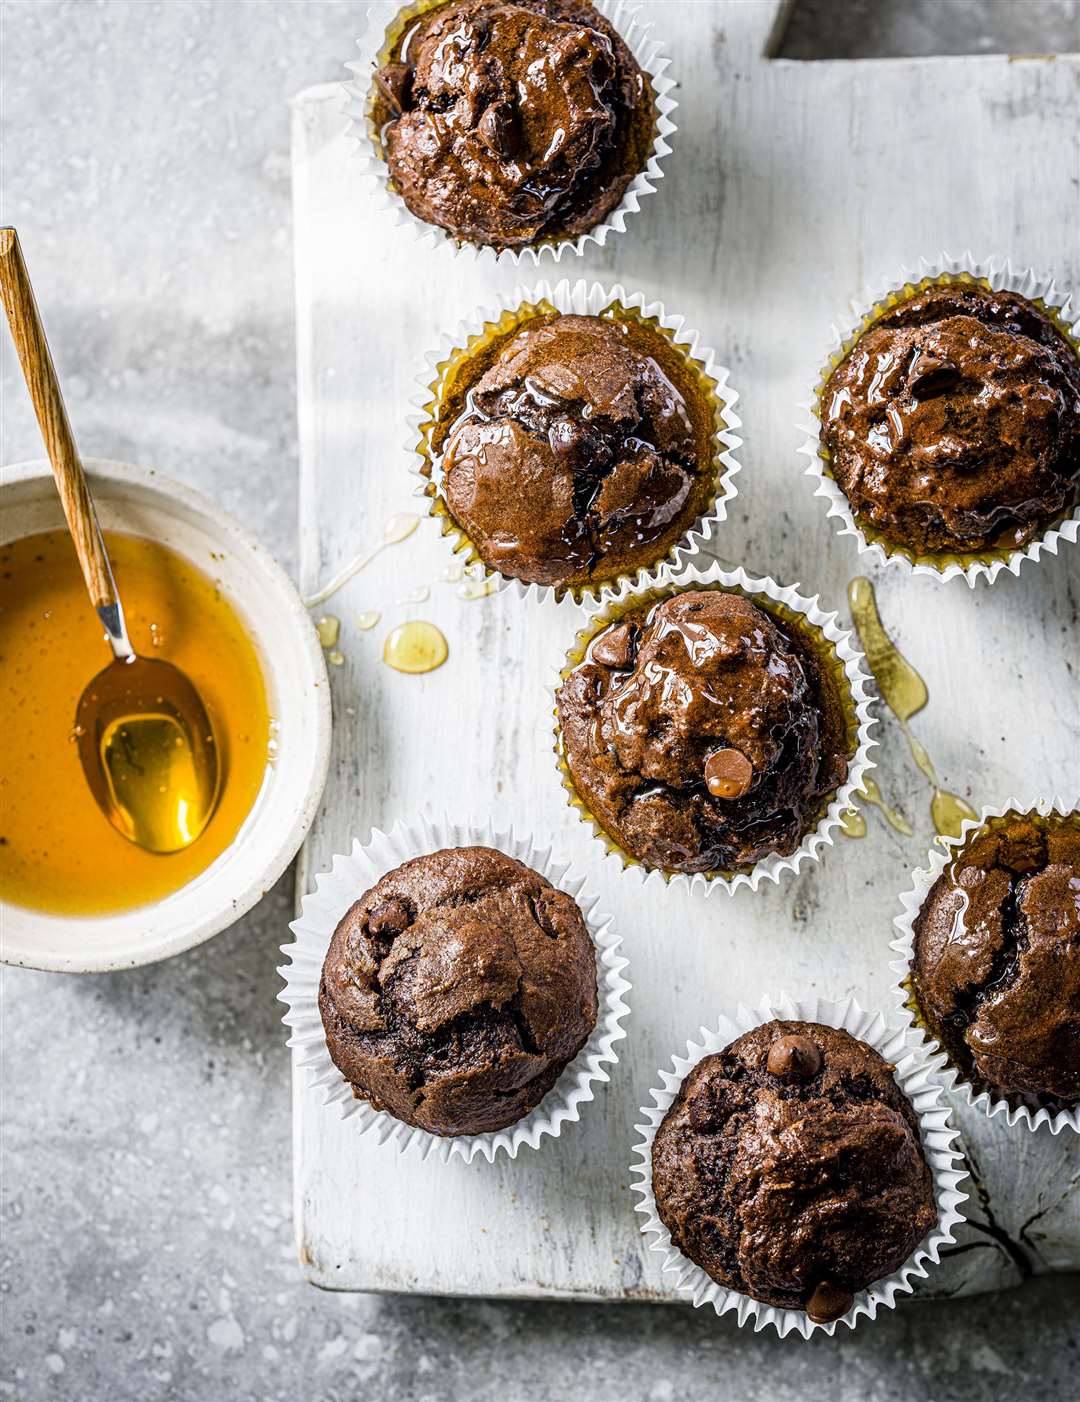 Banana chocolate muffins. Picture: PA Photo/Ant Duncan